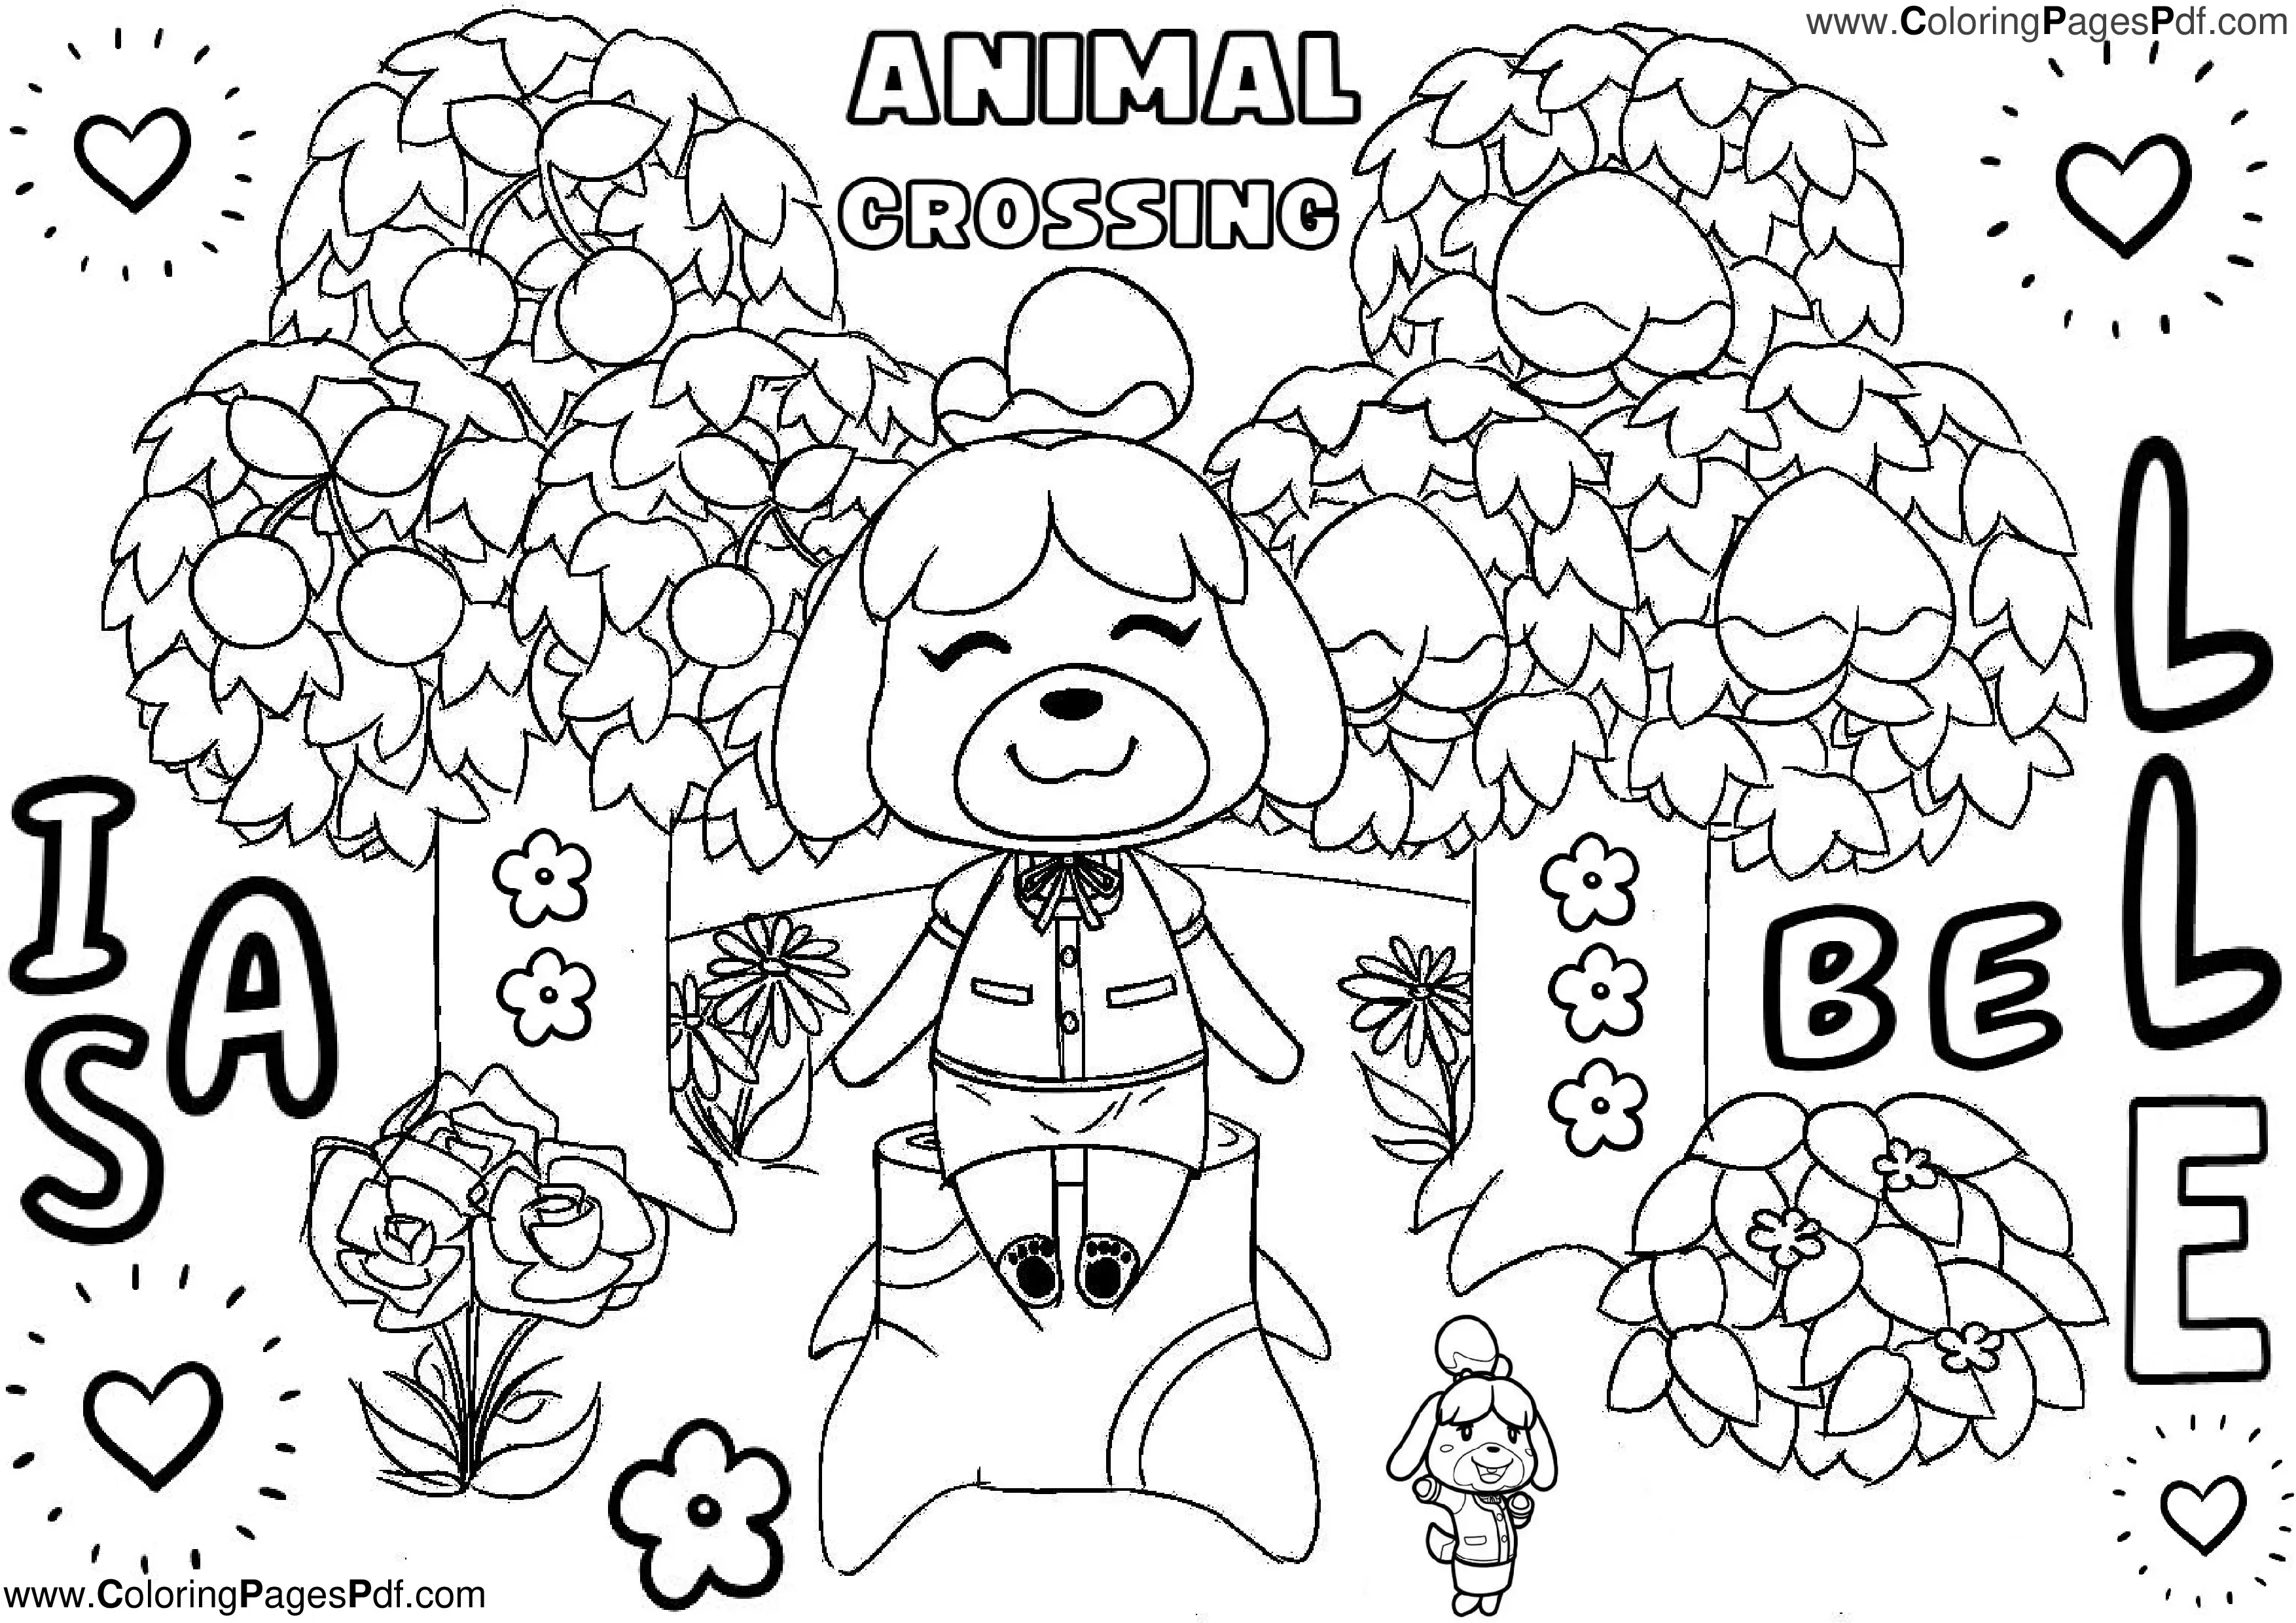 Animal crossing coloring pages isabelle